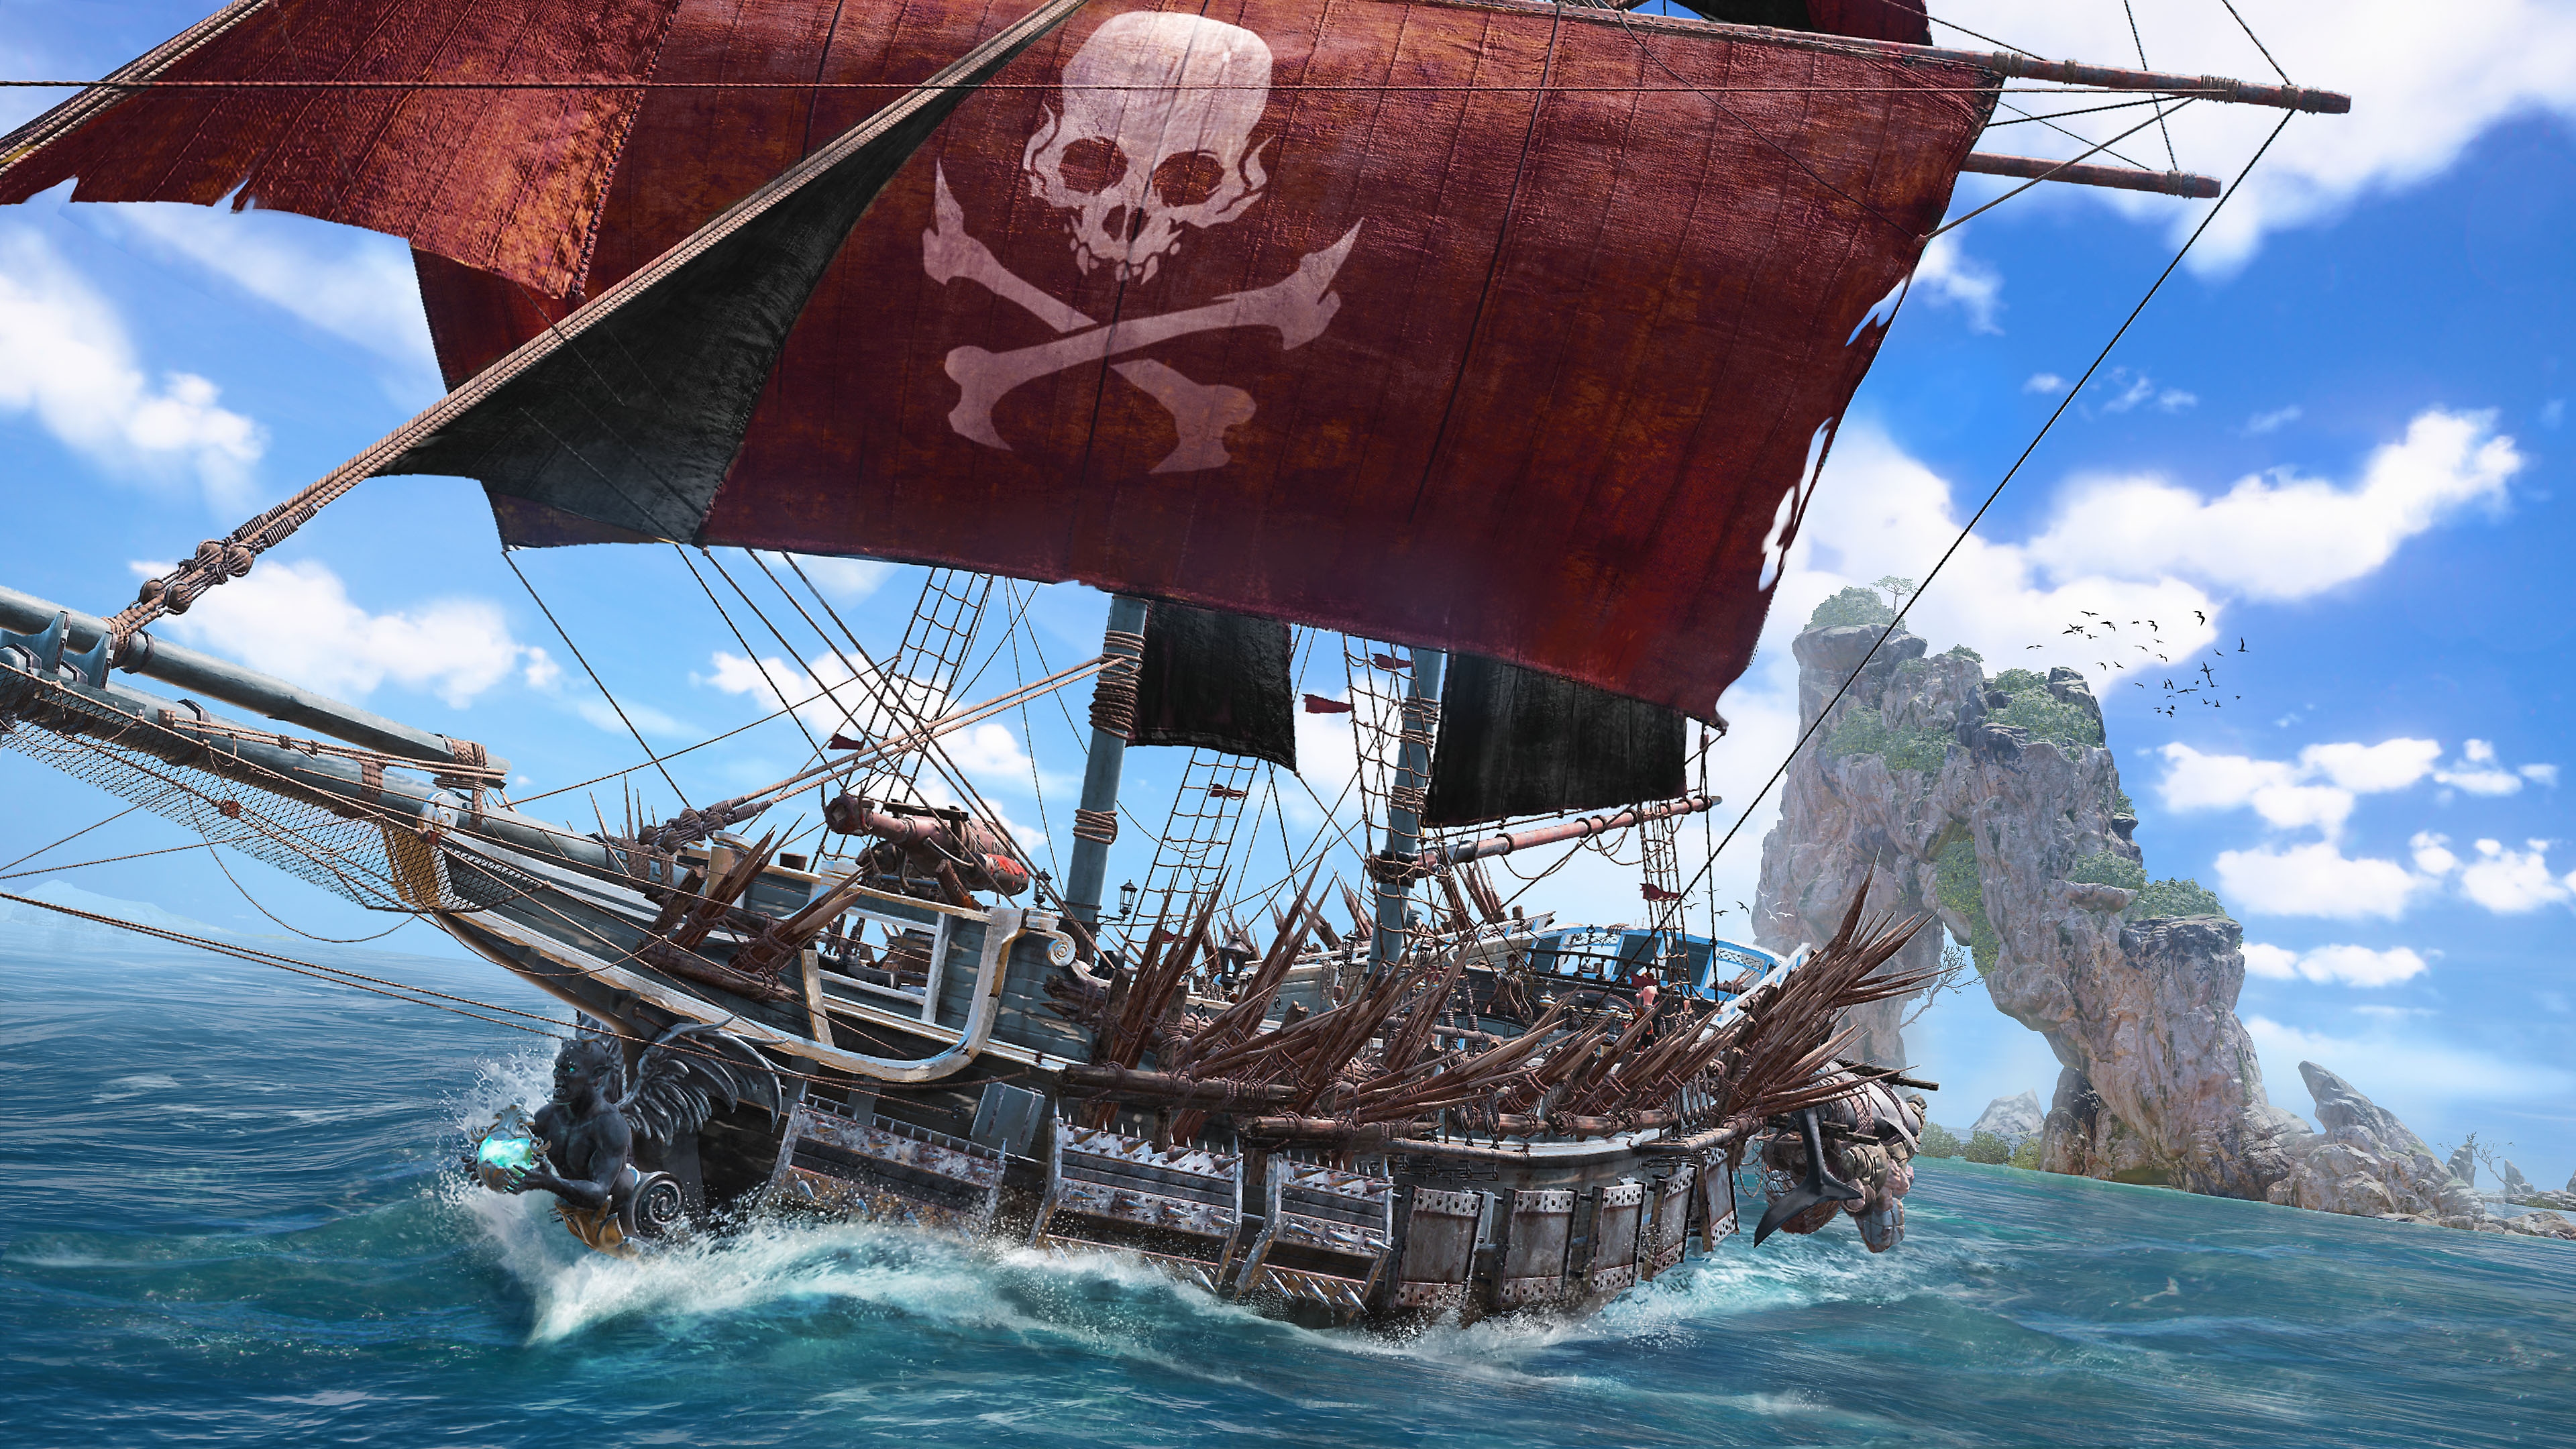 Skull & Bones screenshot showing a pirate ship with a skull and cross bones on a red main sail